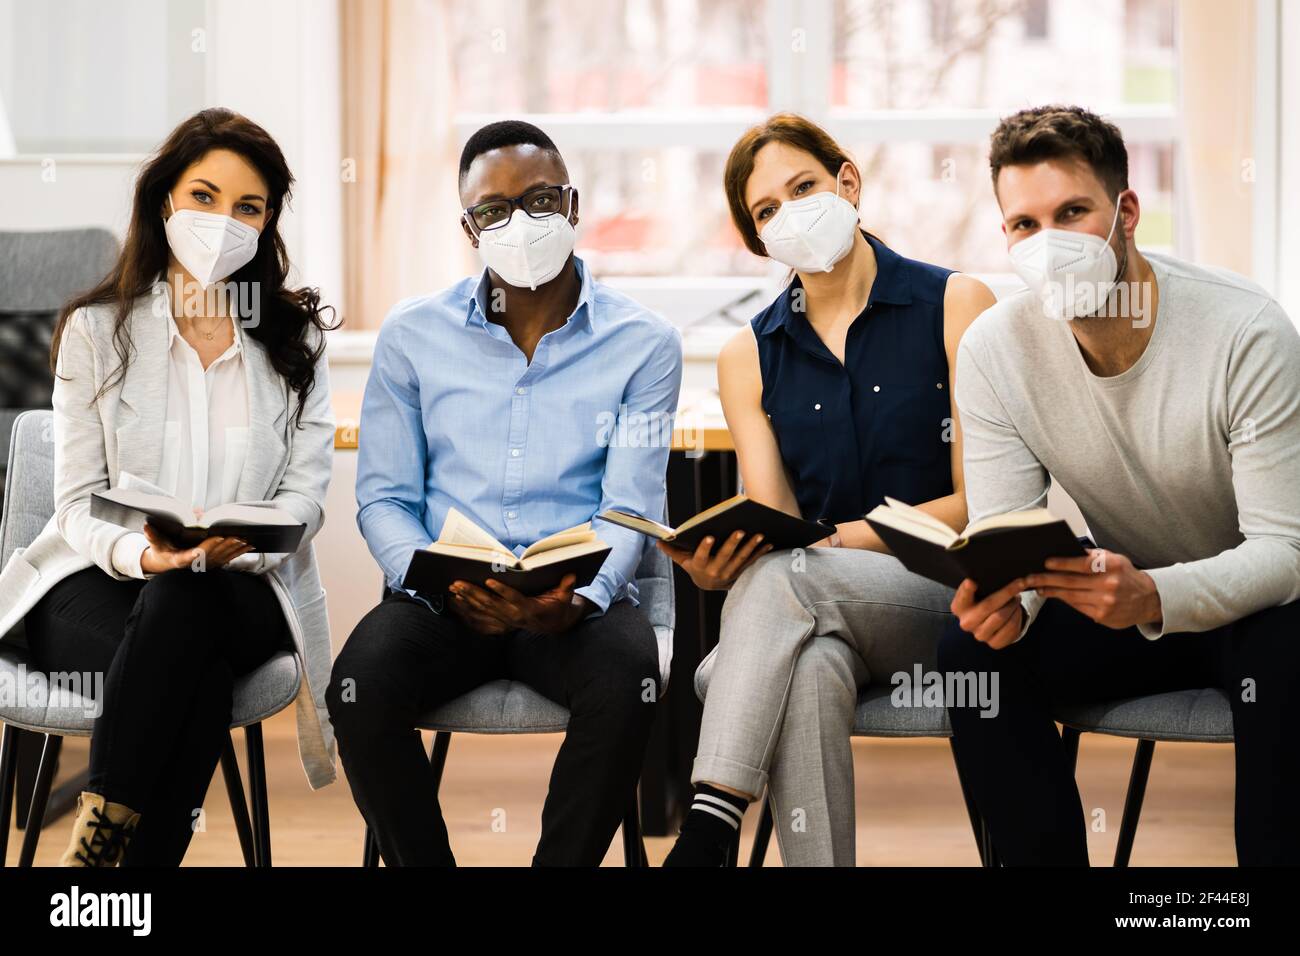 Group Bible Study And Discipleship. People Reading Stock Photo